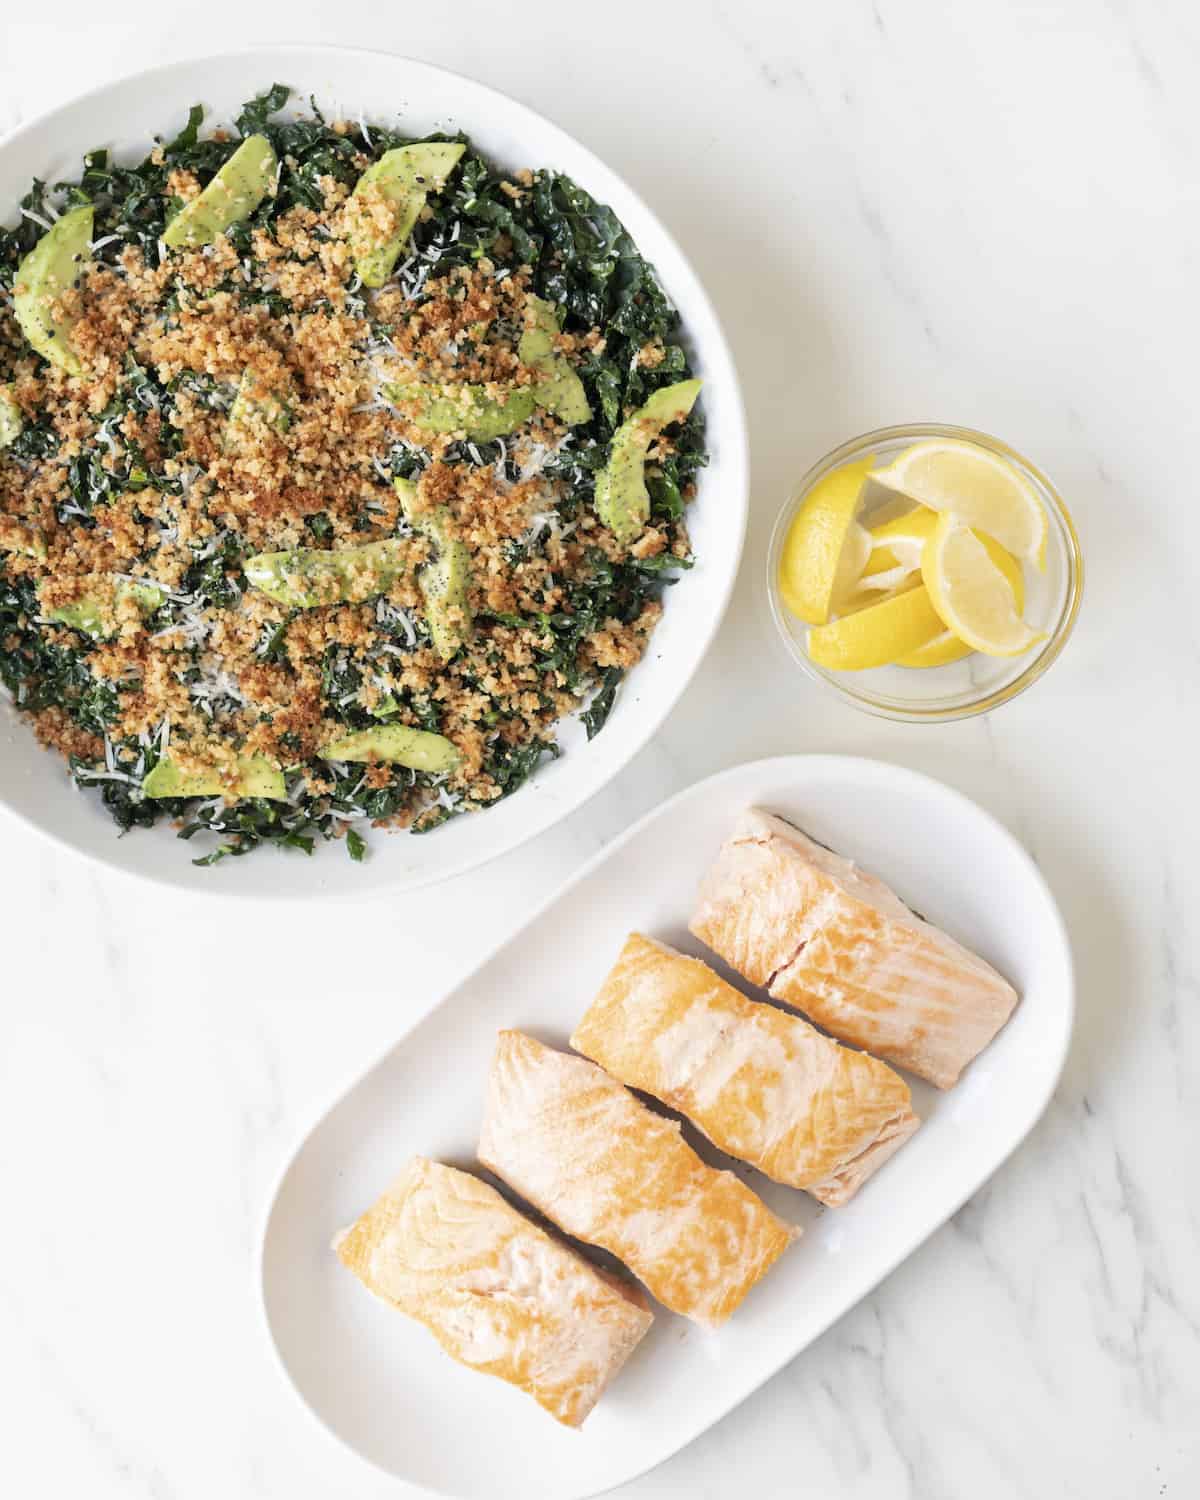 Kale salad in a white ceramic bowl beside a small clear bowl of sliced lemons and a serving platter of cooked salmon on a white marbled countertop.